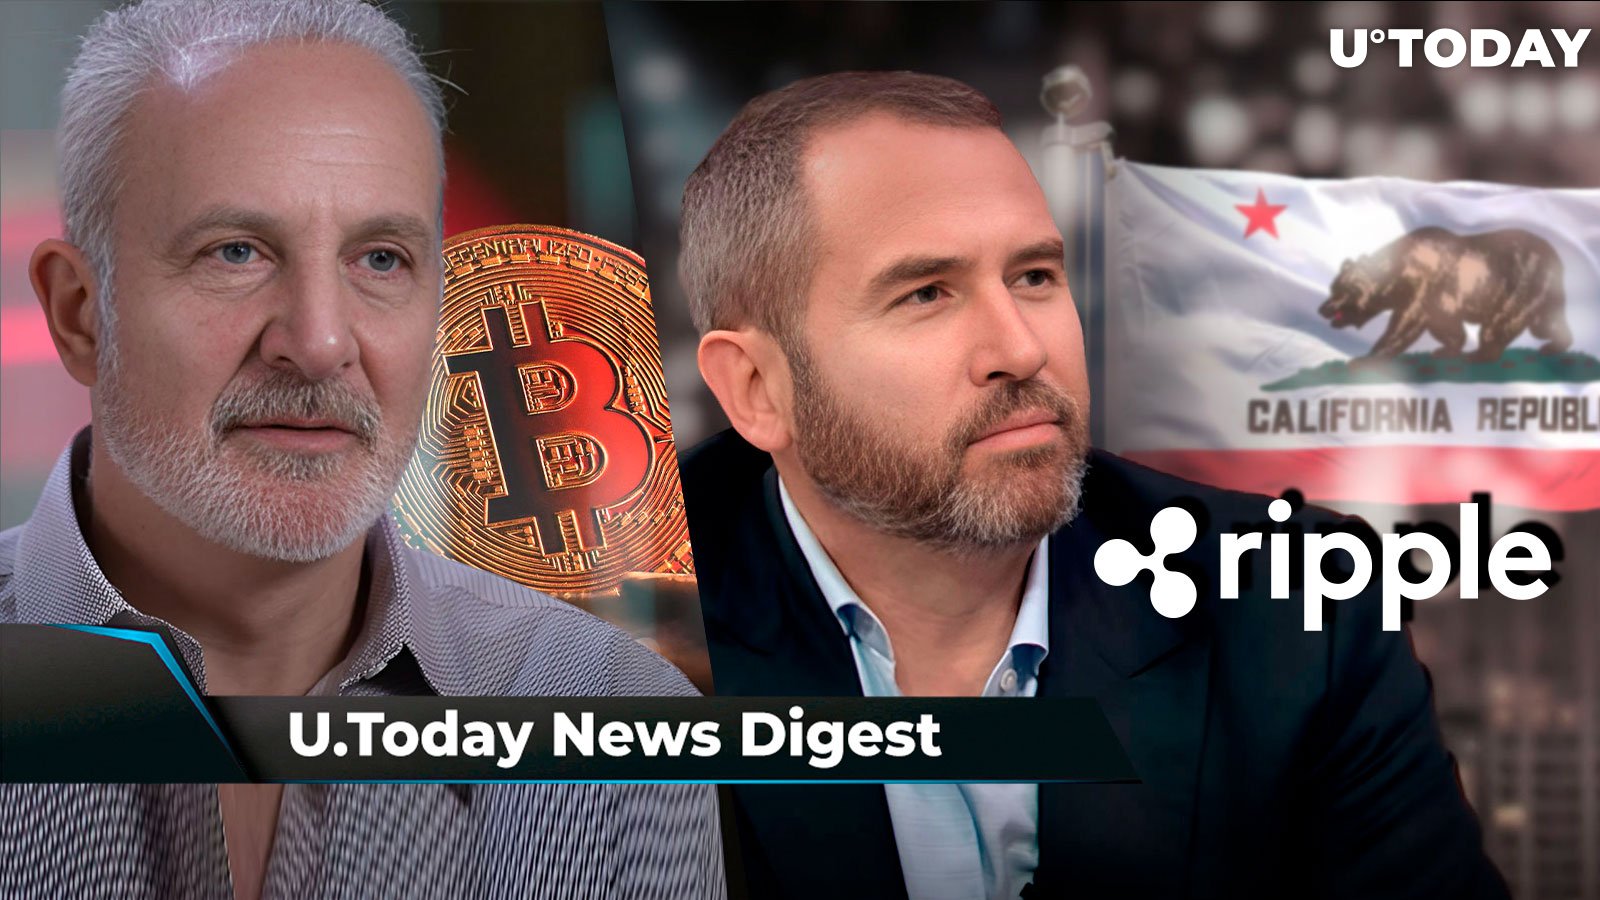 Peter Schiff Issues Gloomy BTC Price Prediction, Ripple CEO Hails 'Big Win' in California, SHIB Burn Rate Surges 2,682% With No Price Momentum: Crypto News Digest by U.Today